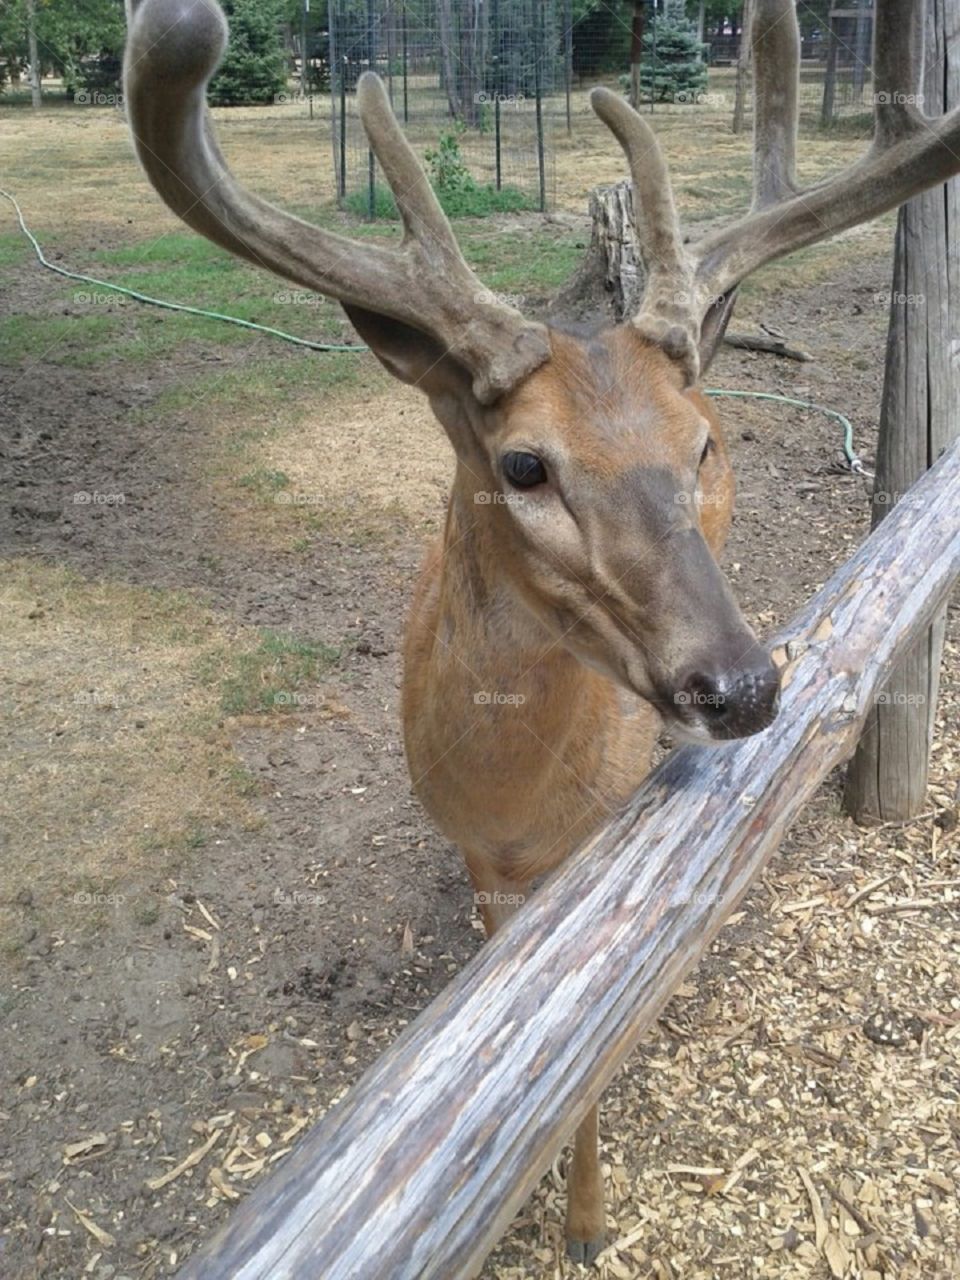 Deer. There's a park in Wisconsin where you can walk side by side with deer and feed them. its awesome!